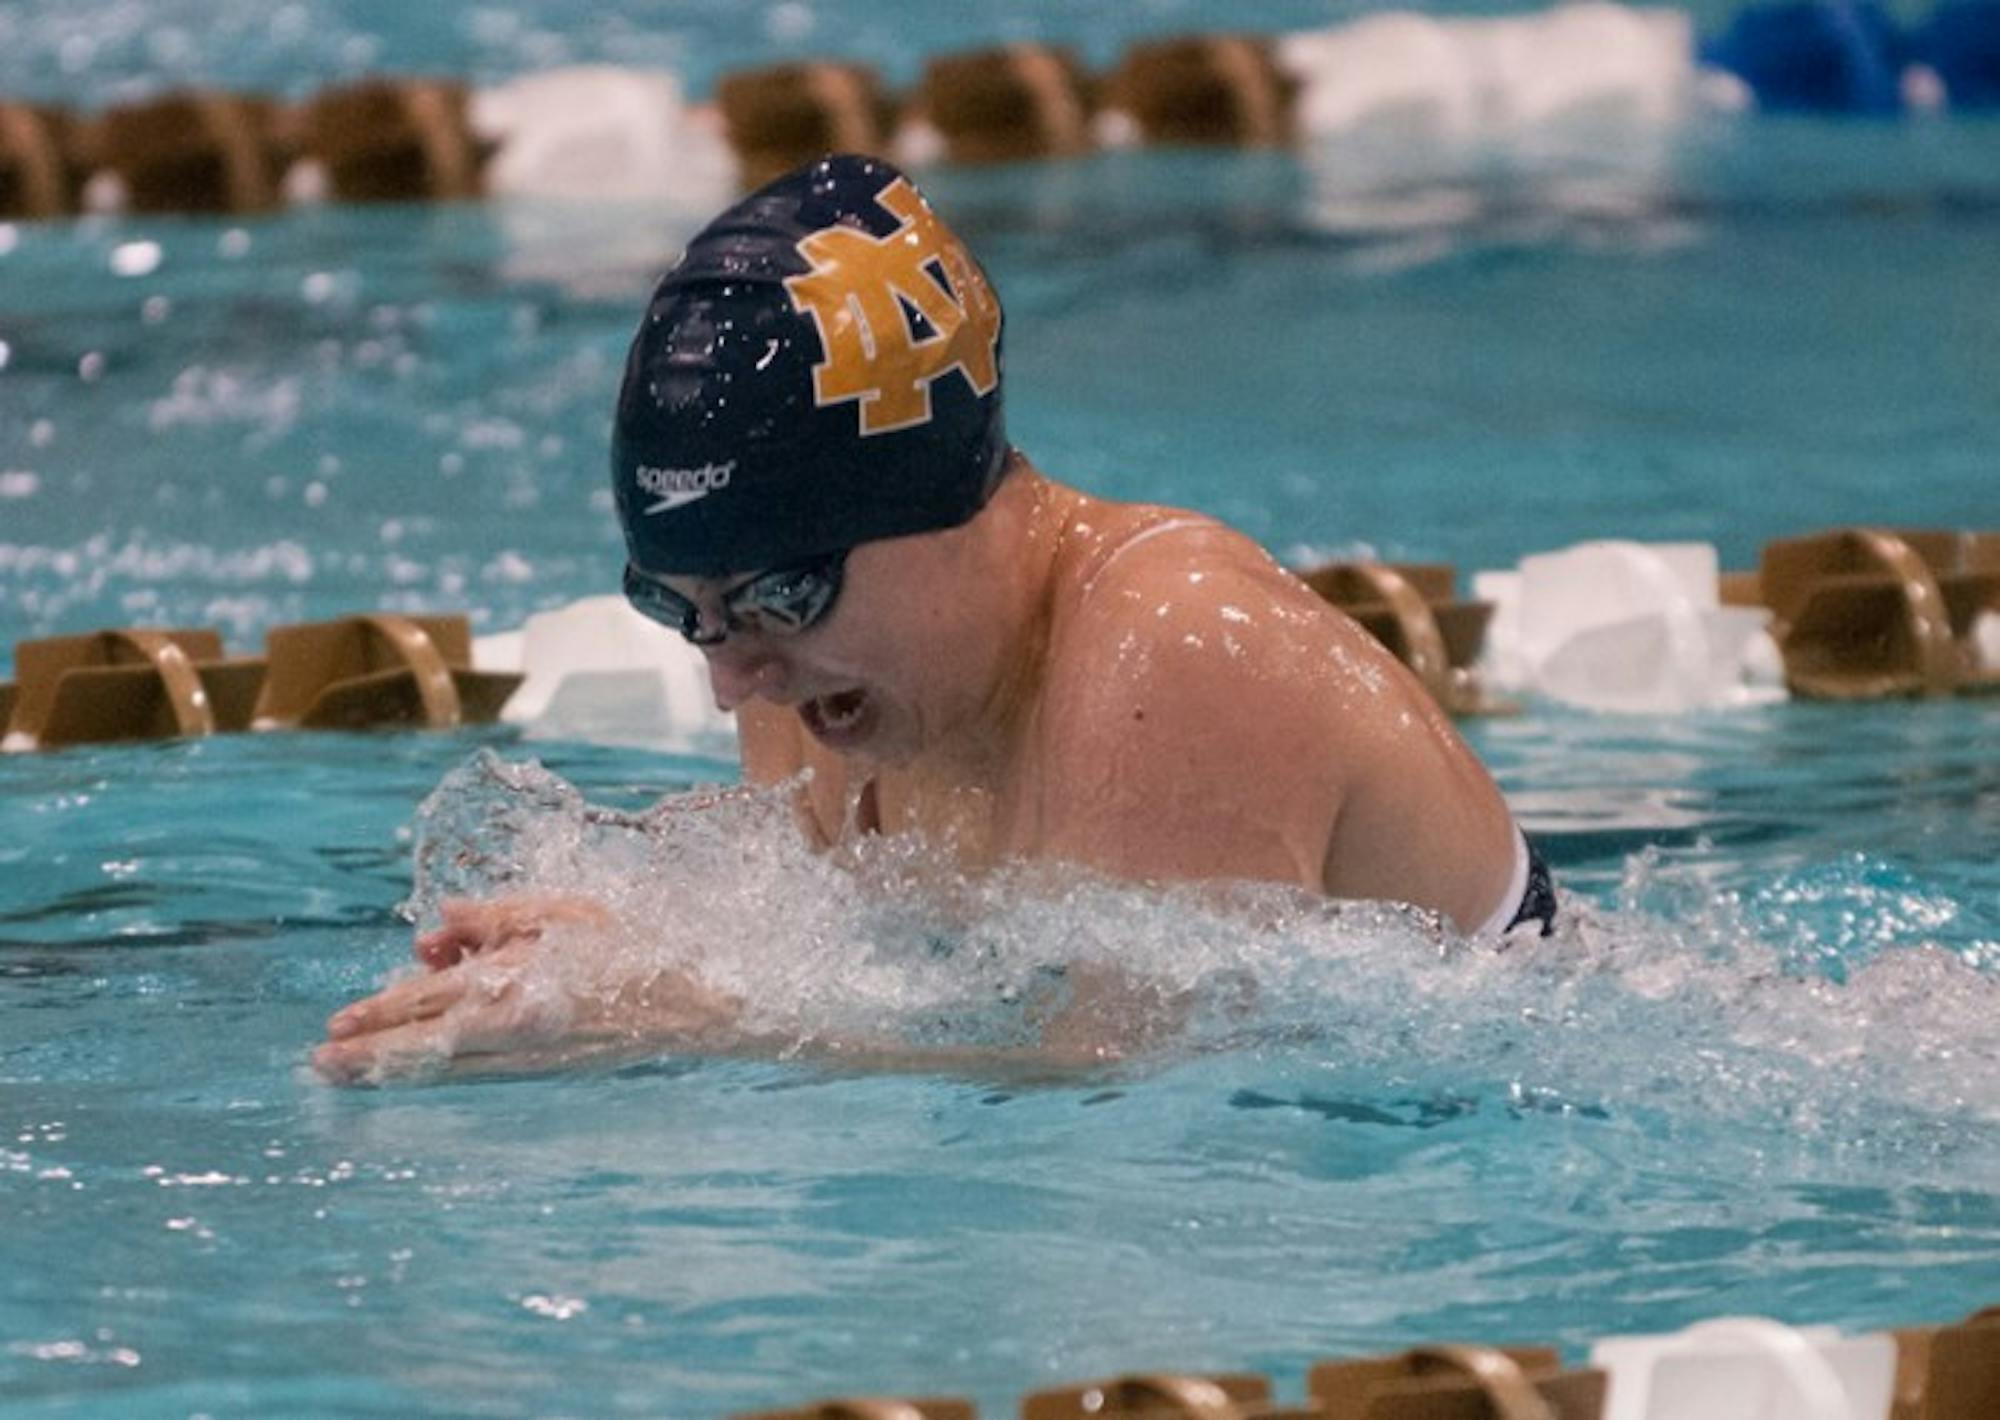 Freshman Danielle Margheret swims breaststroke in the 400-yard medley relay at the Dennis Stark Relays on Oct. 11, 2013. Margheret took sixth place in the 200-yard breaststroke Saturday against Louisville.